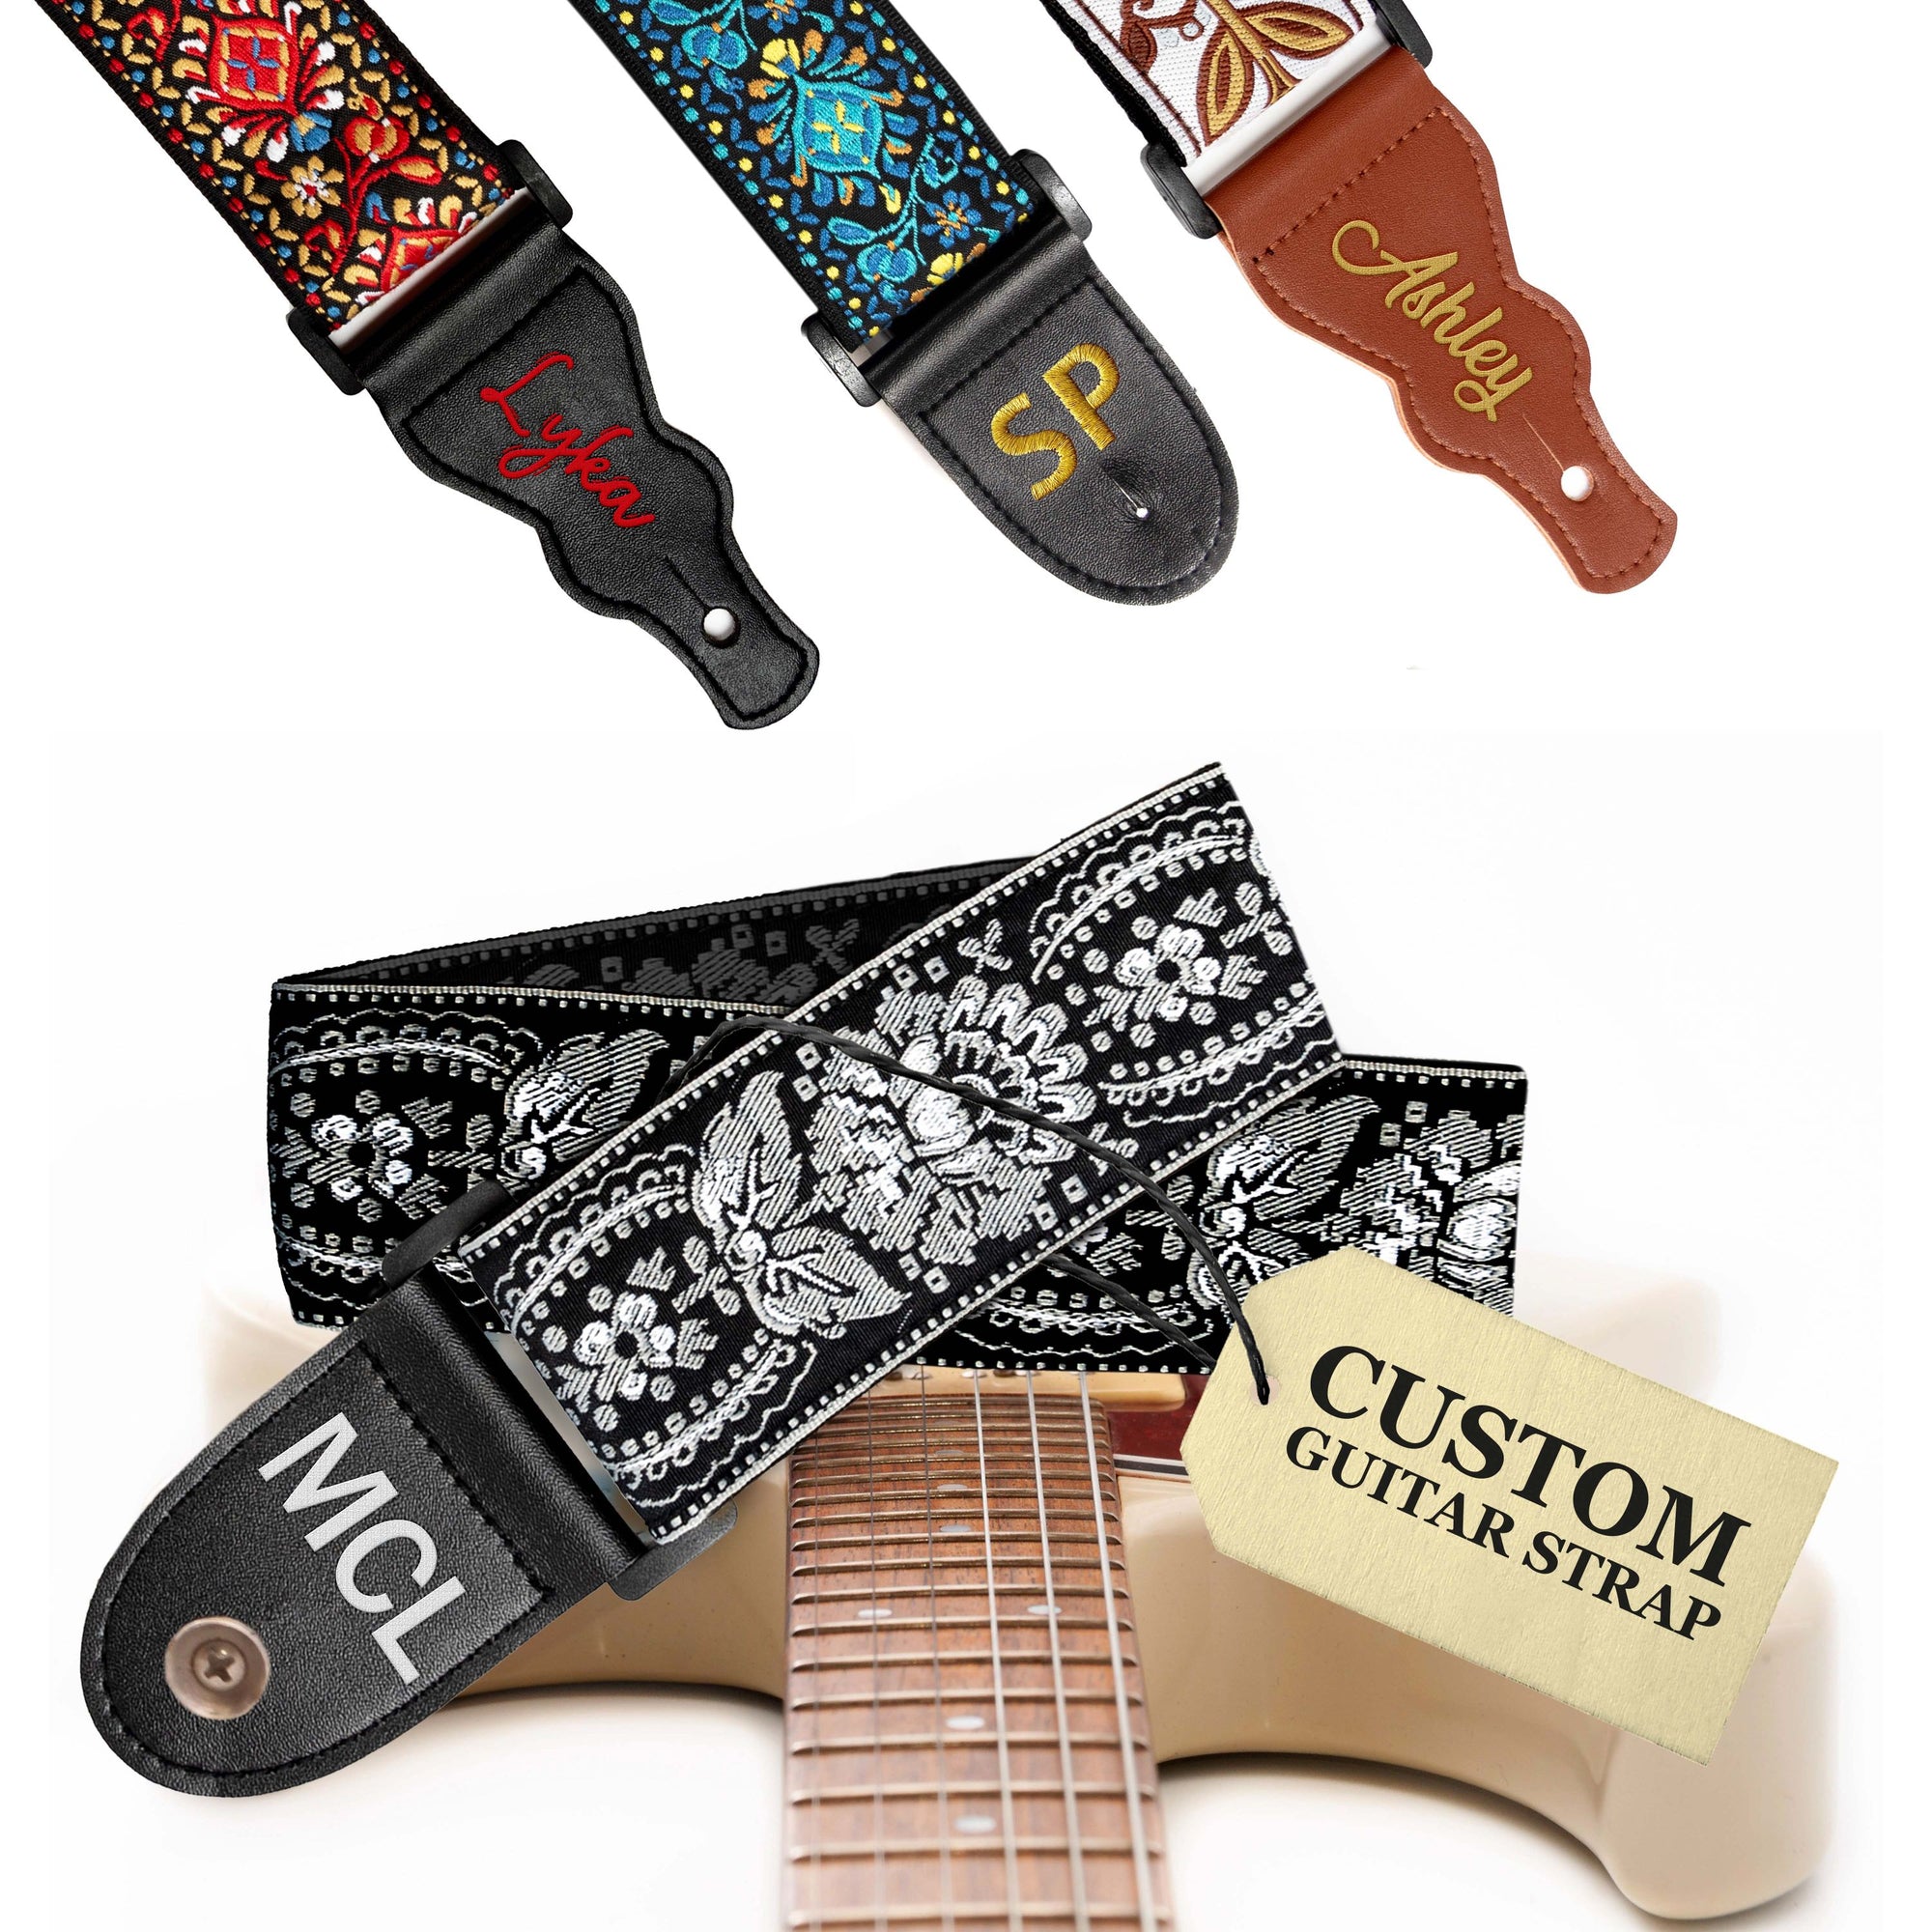 Personalized Guitar Strap- Add your text to make your own unique guitar strap. Best custom gift